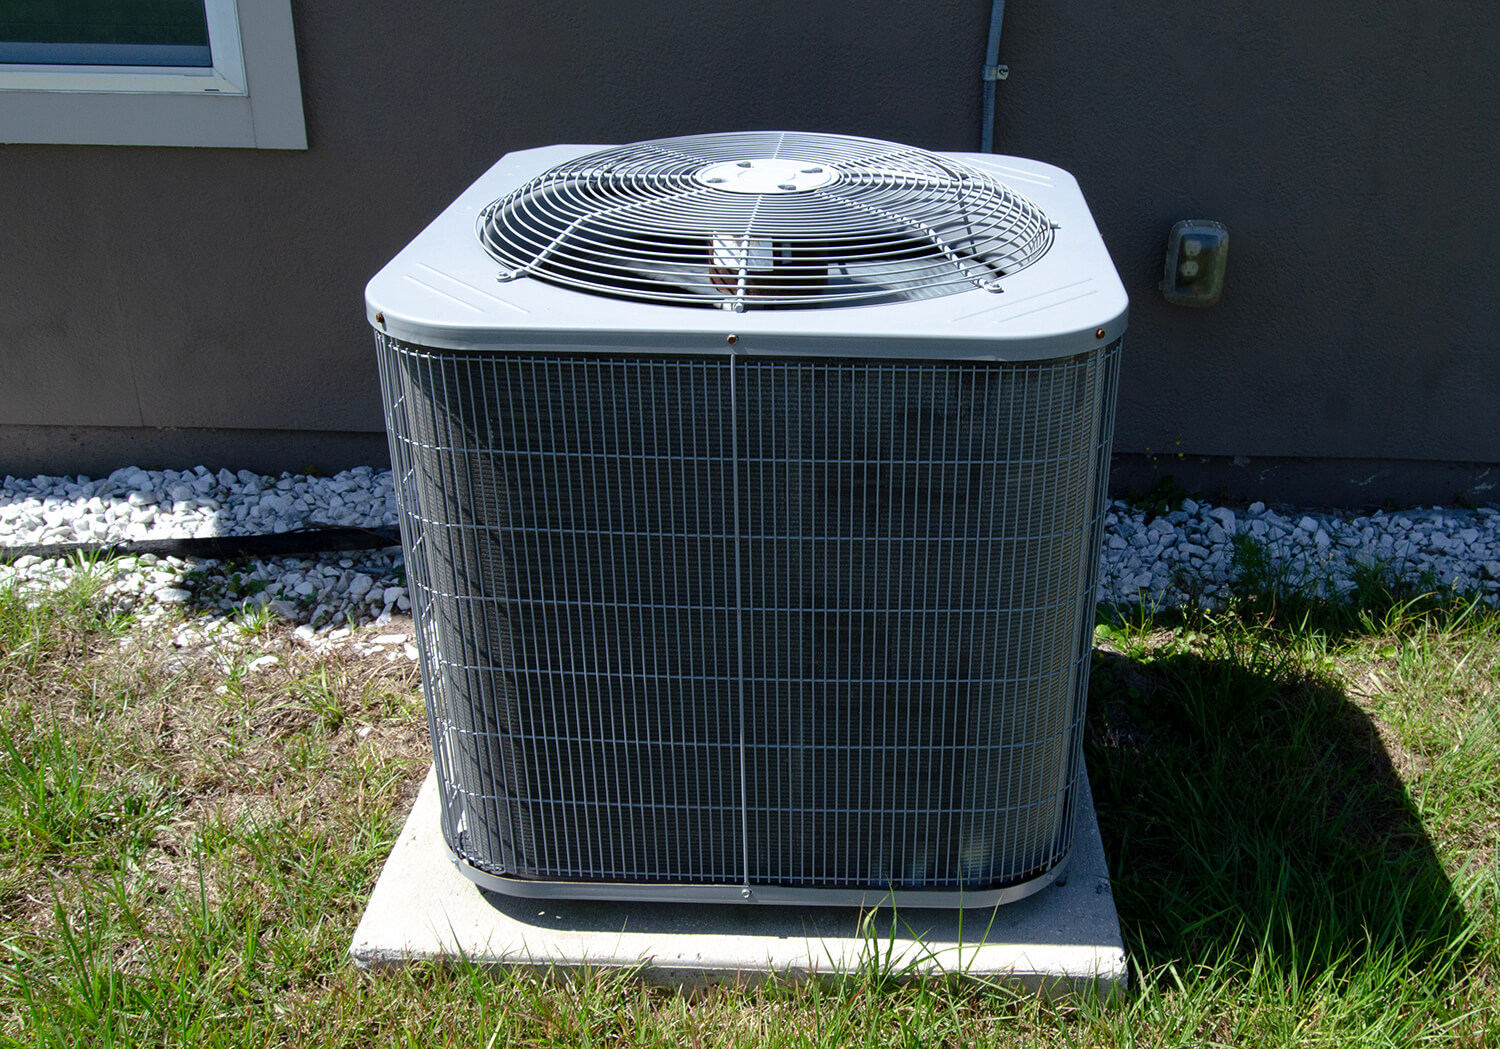 Ductless heat pump changes whole function of garage